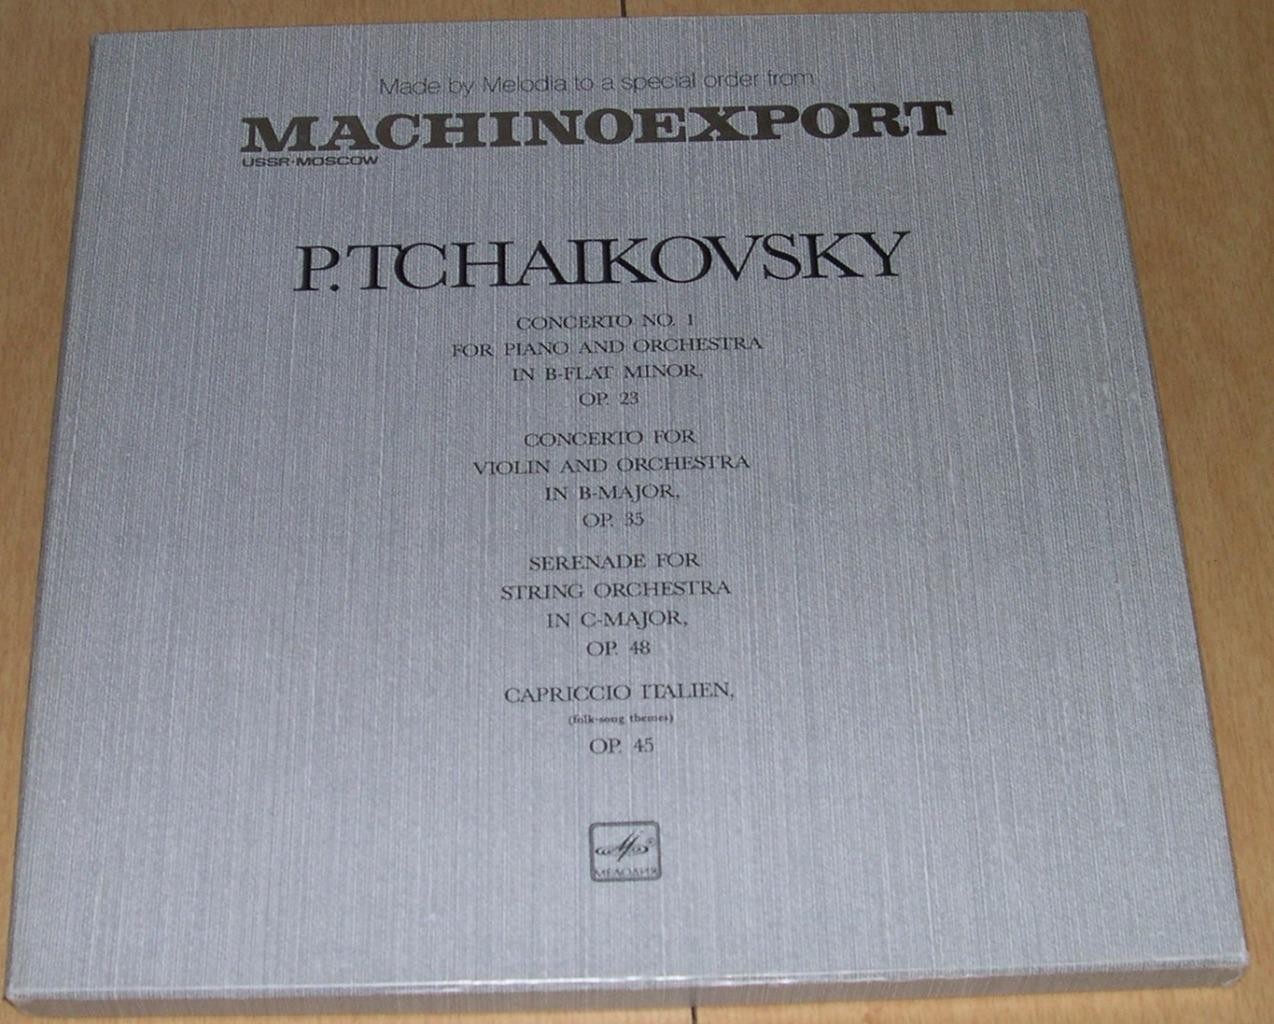 P. Tchaikovsky (special order from Machinoexport)